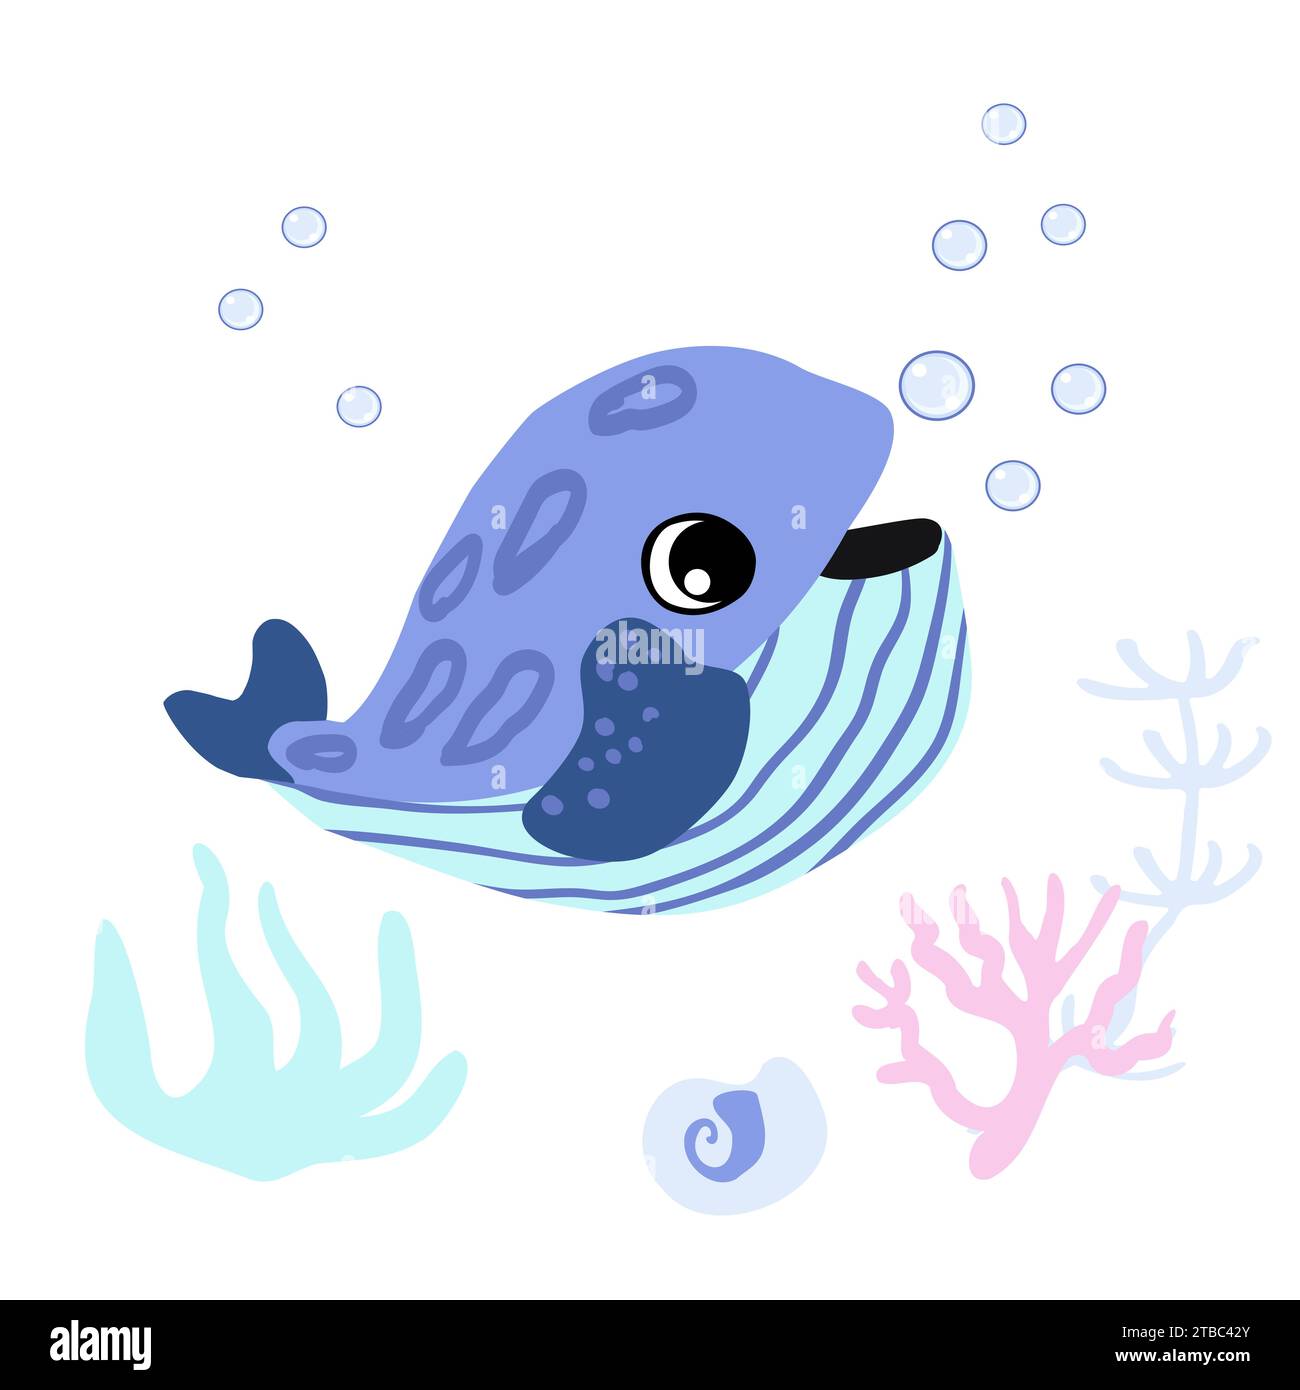 Cute Minke whale with bubbles, seashells and seaweed underwater. Vector illustration of marine life character Stock Vector